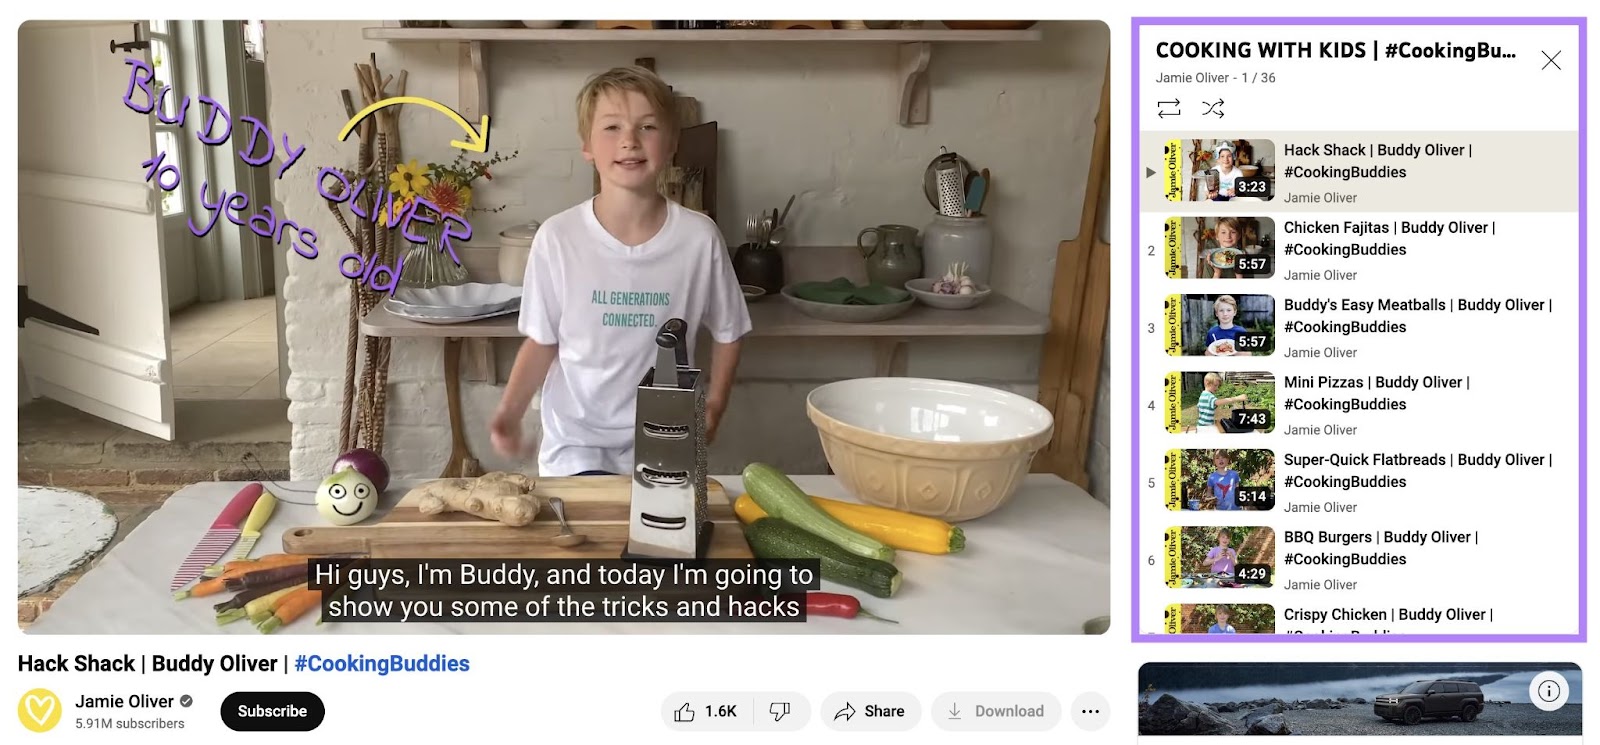 Jamie Oliver's "COOKING WITH KIDS" YouTube playlist